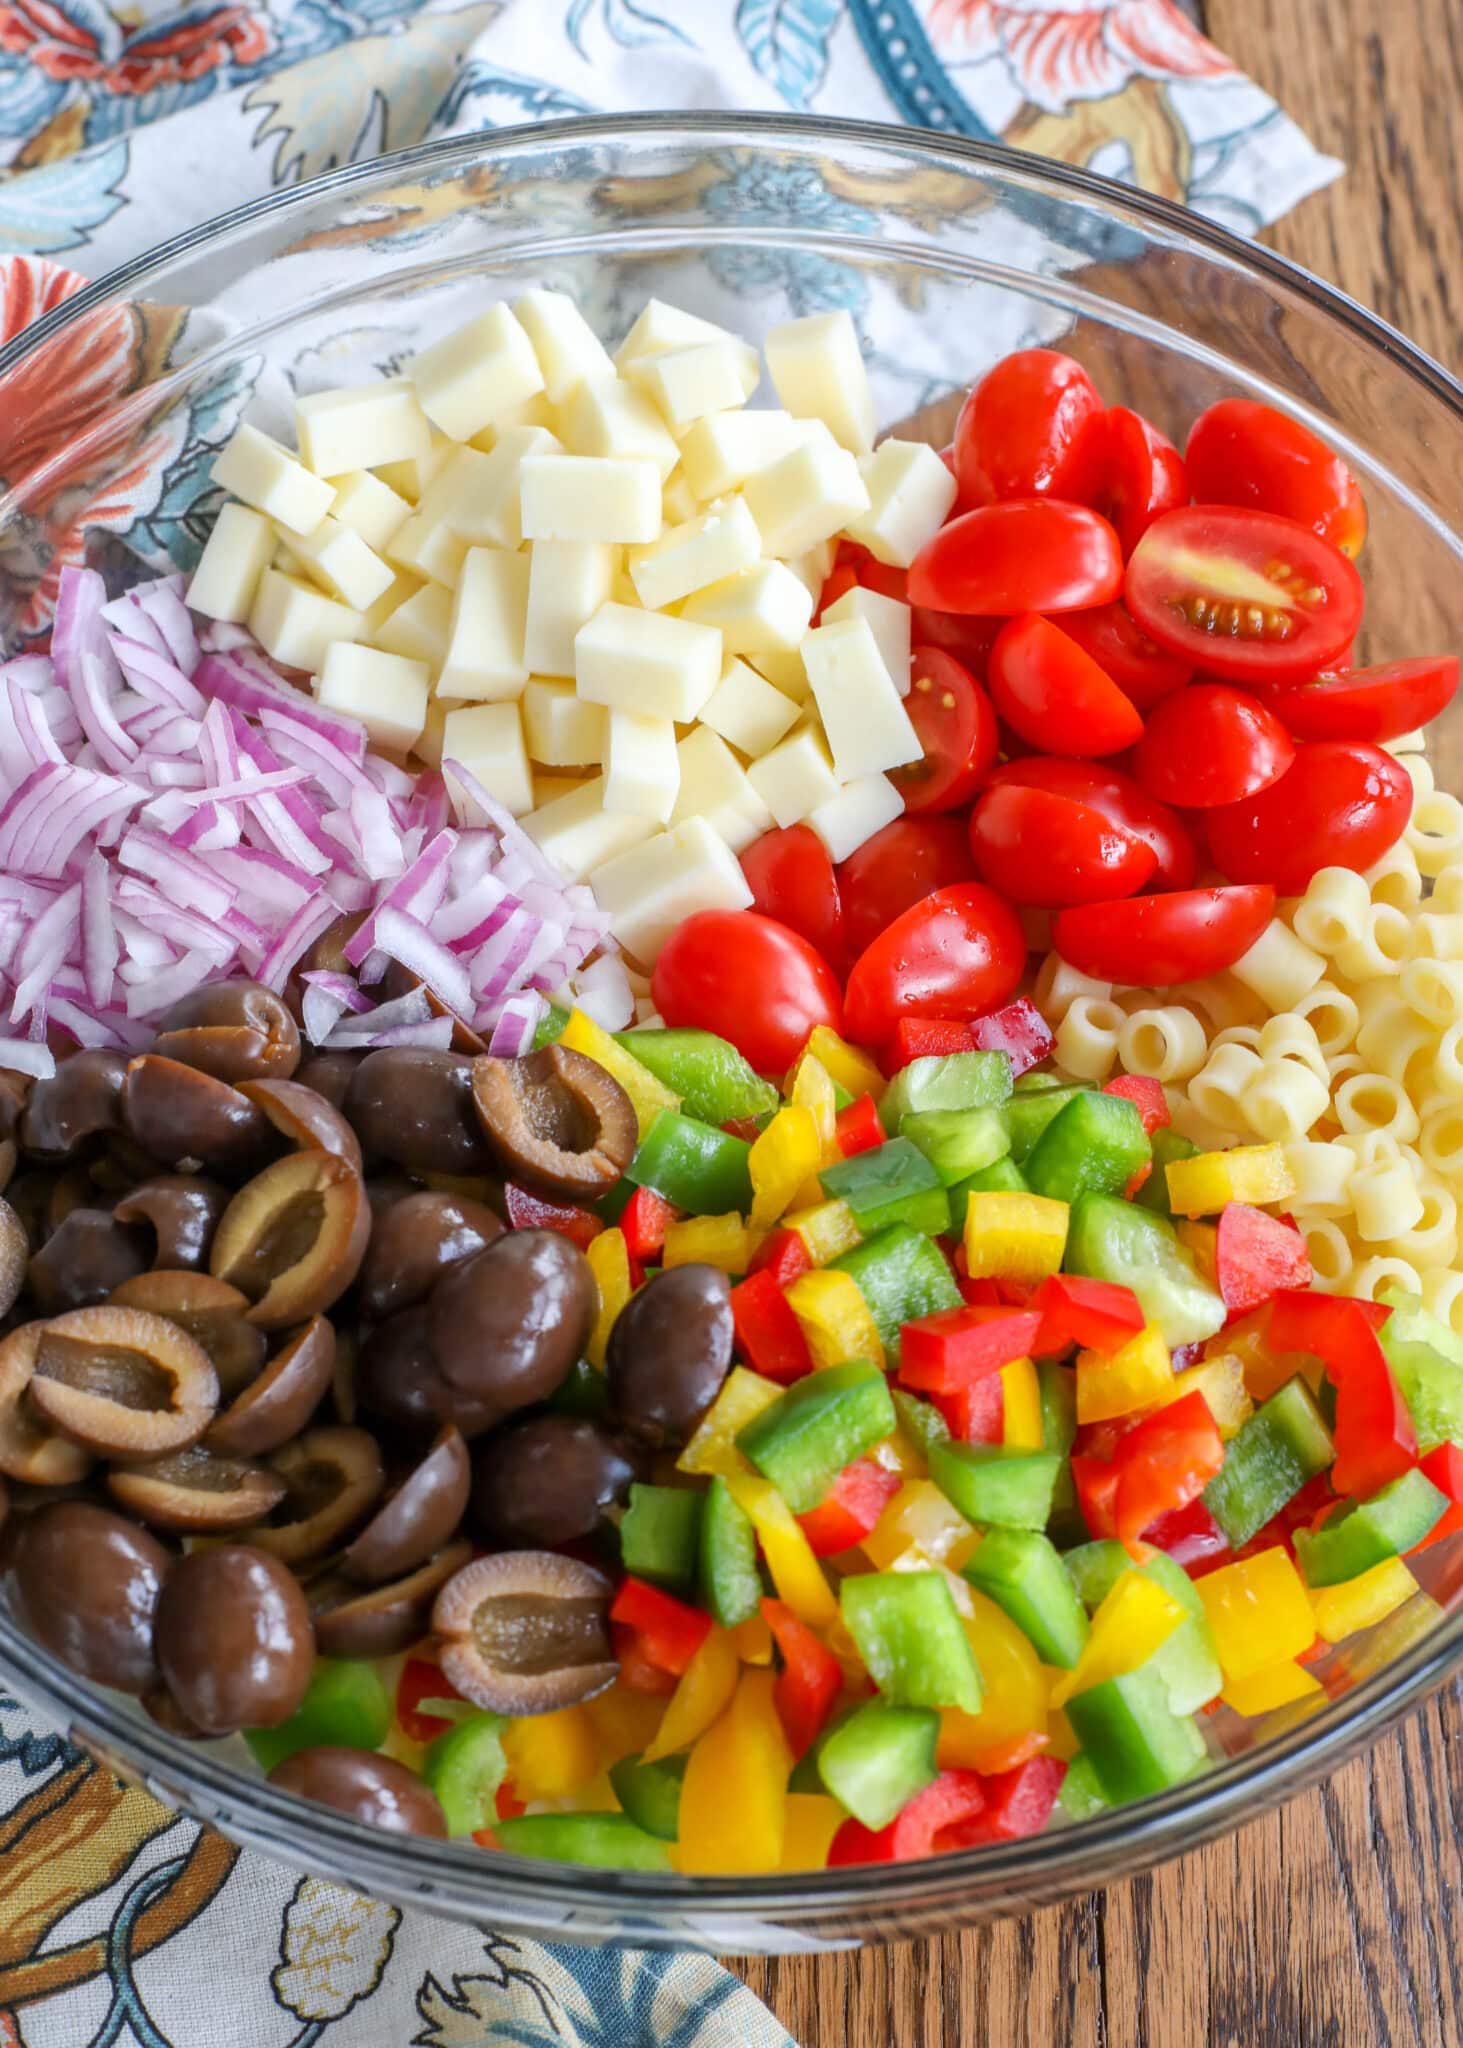 This Tangy Pasta Salad is filled with crunchy bell peppers and onions, tangy olives, and sweet tomatoes. Tossed in a light oil and vinegar dressing the recipe is great for summer parties.